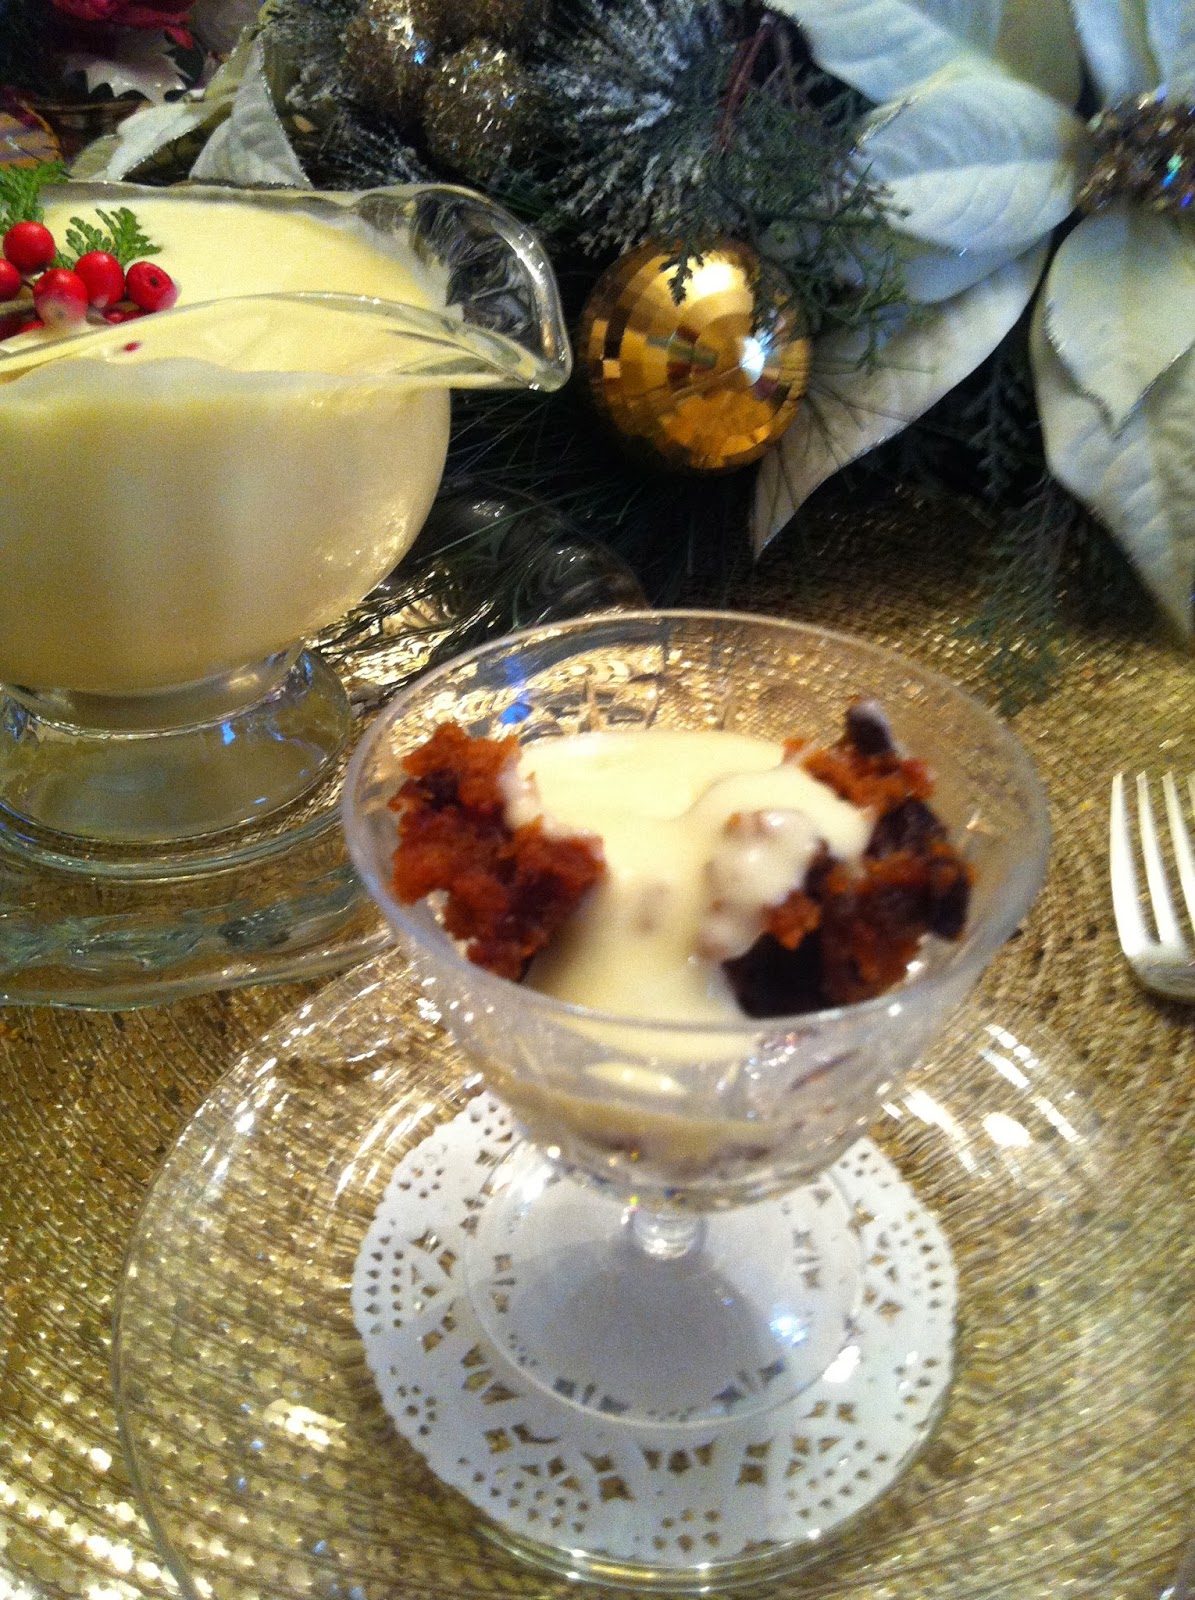 Mennonite Girls Can Cook: Christmas Pudding with Sauce